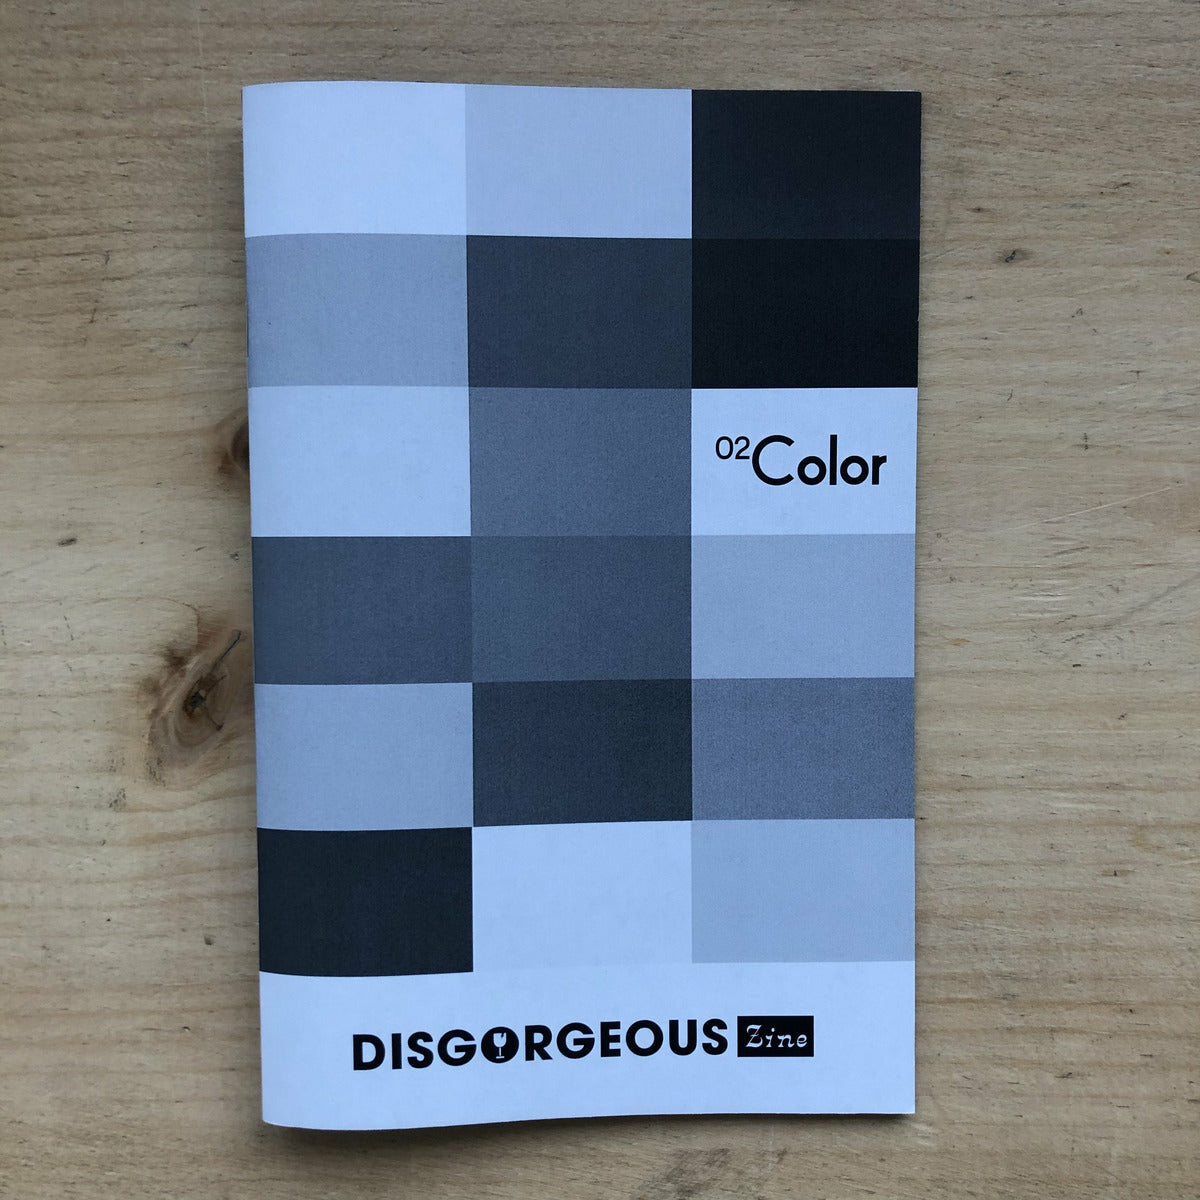 Disgorgeous Zine, Issue 2, "Color"